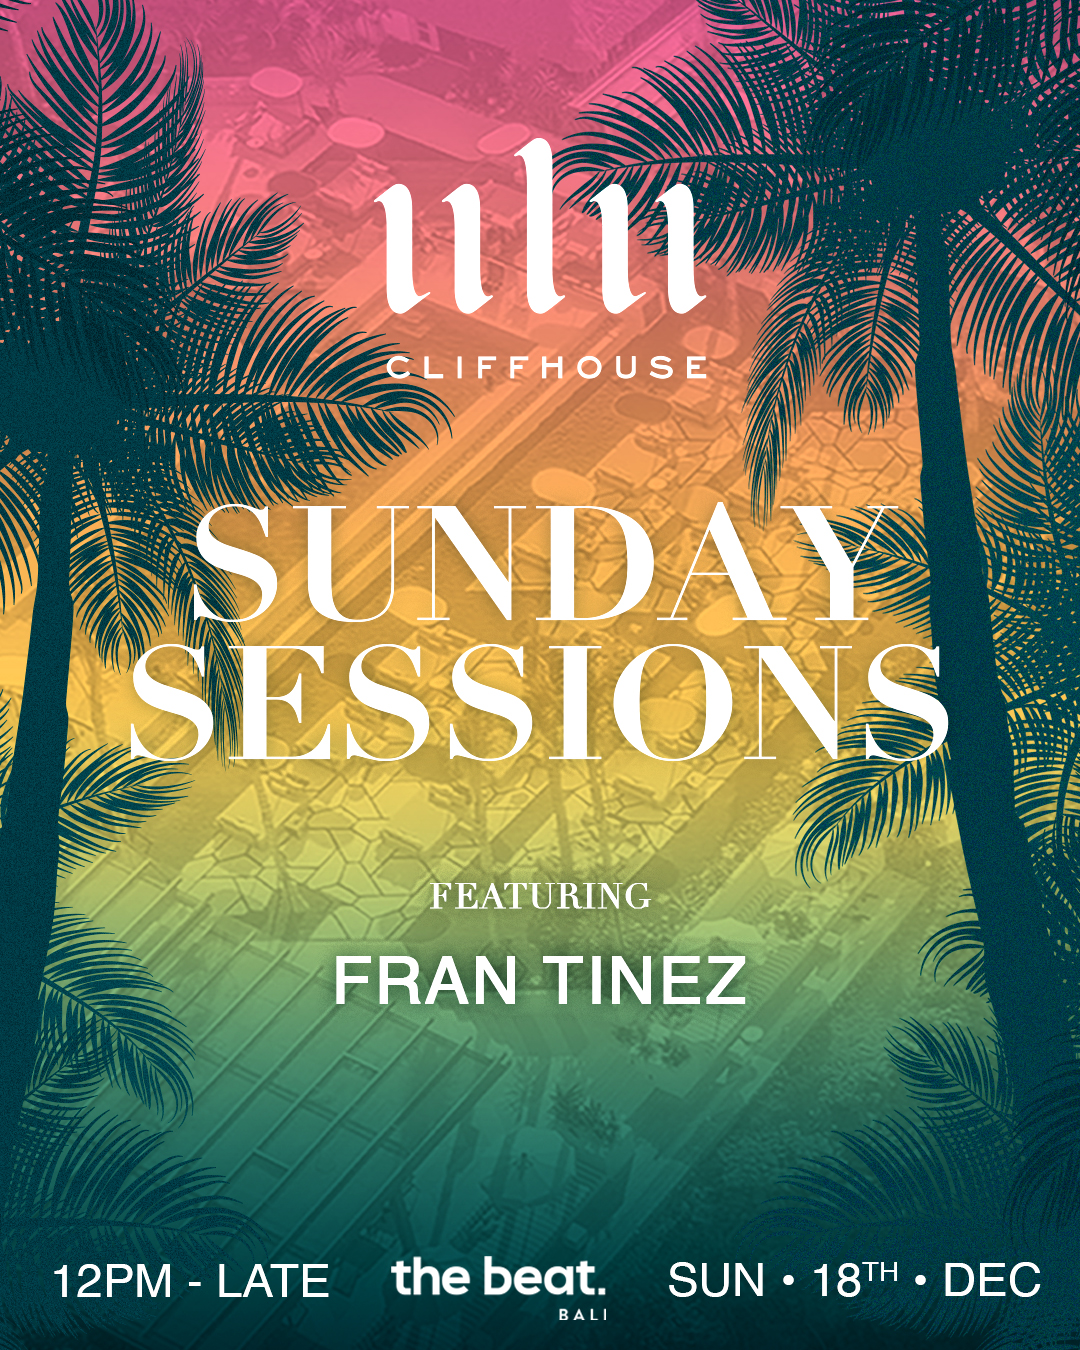 SUNDAY SESSIONS AT ULU CLIFFHOUSE – DECEMBER 18TH thumbnail image